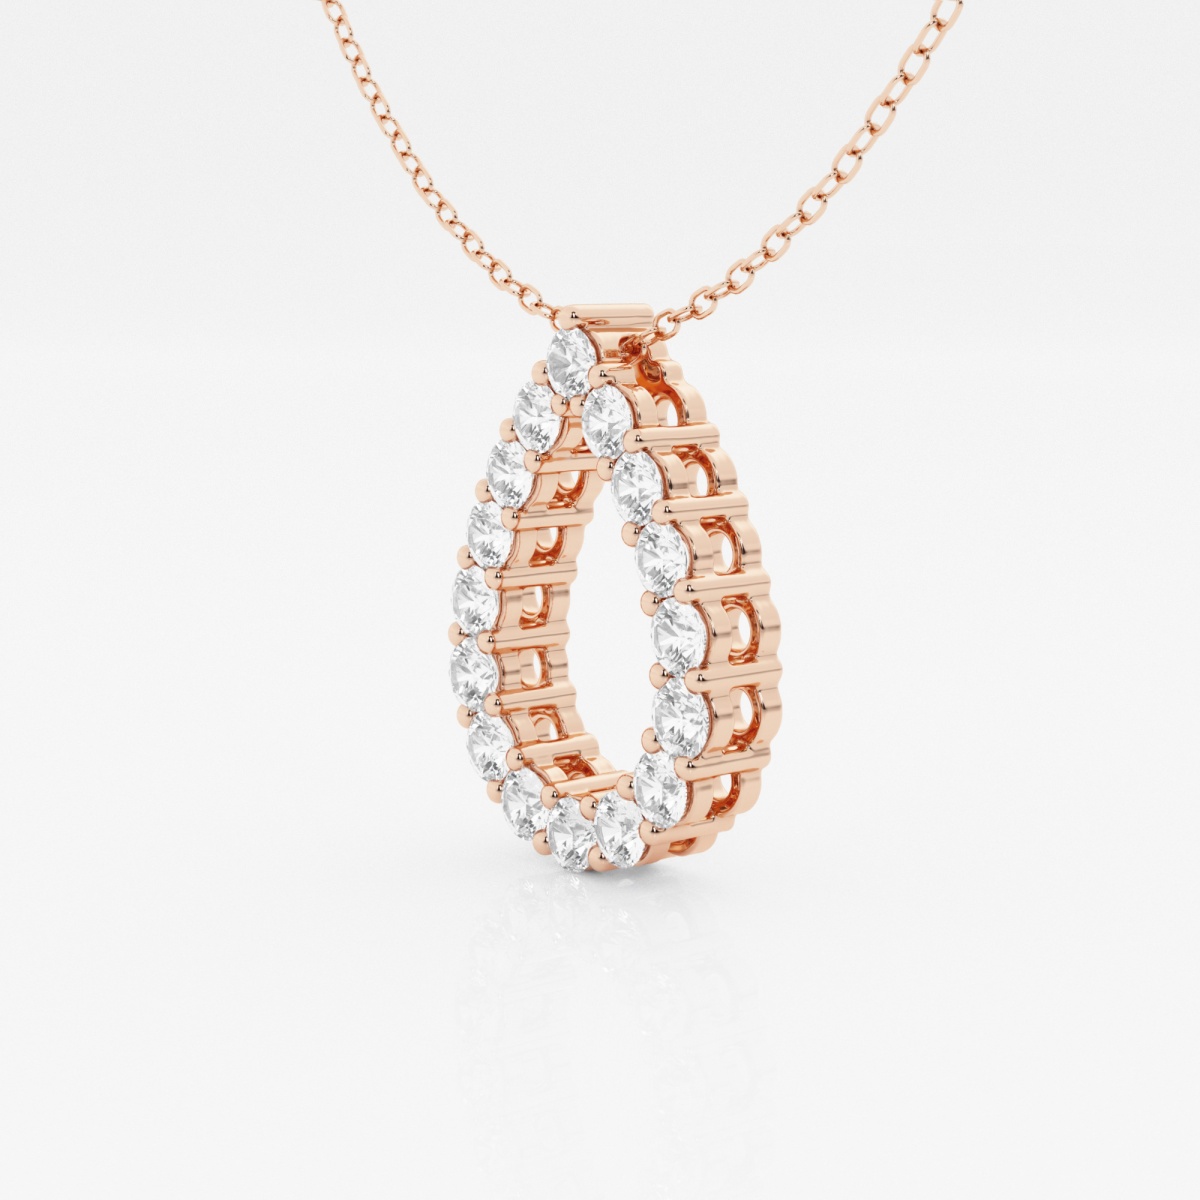 Additional Image 1 for  1 ctw Round Lab Grown Diamond Teardrop Fashion Pendant with Adjustable Chain